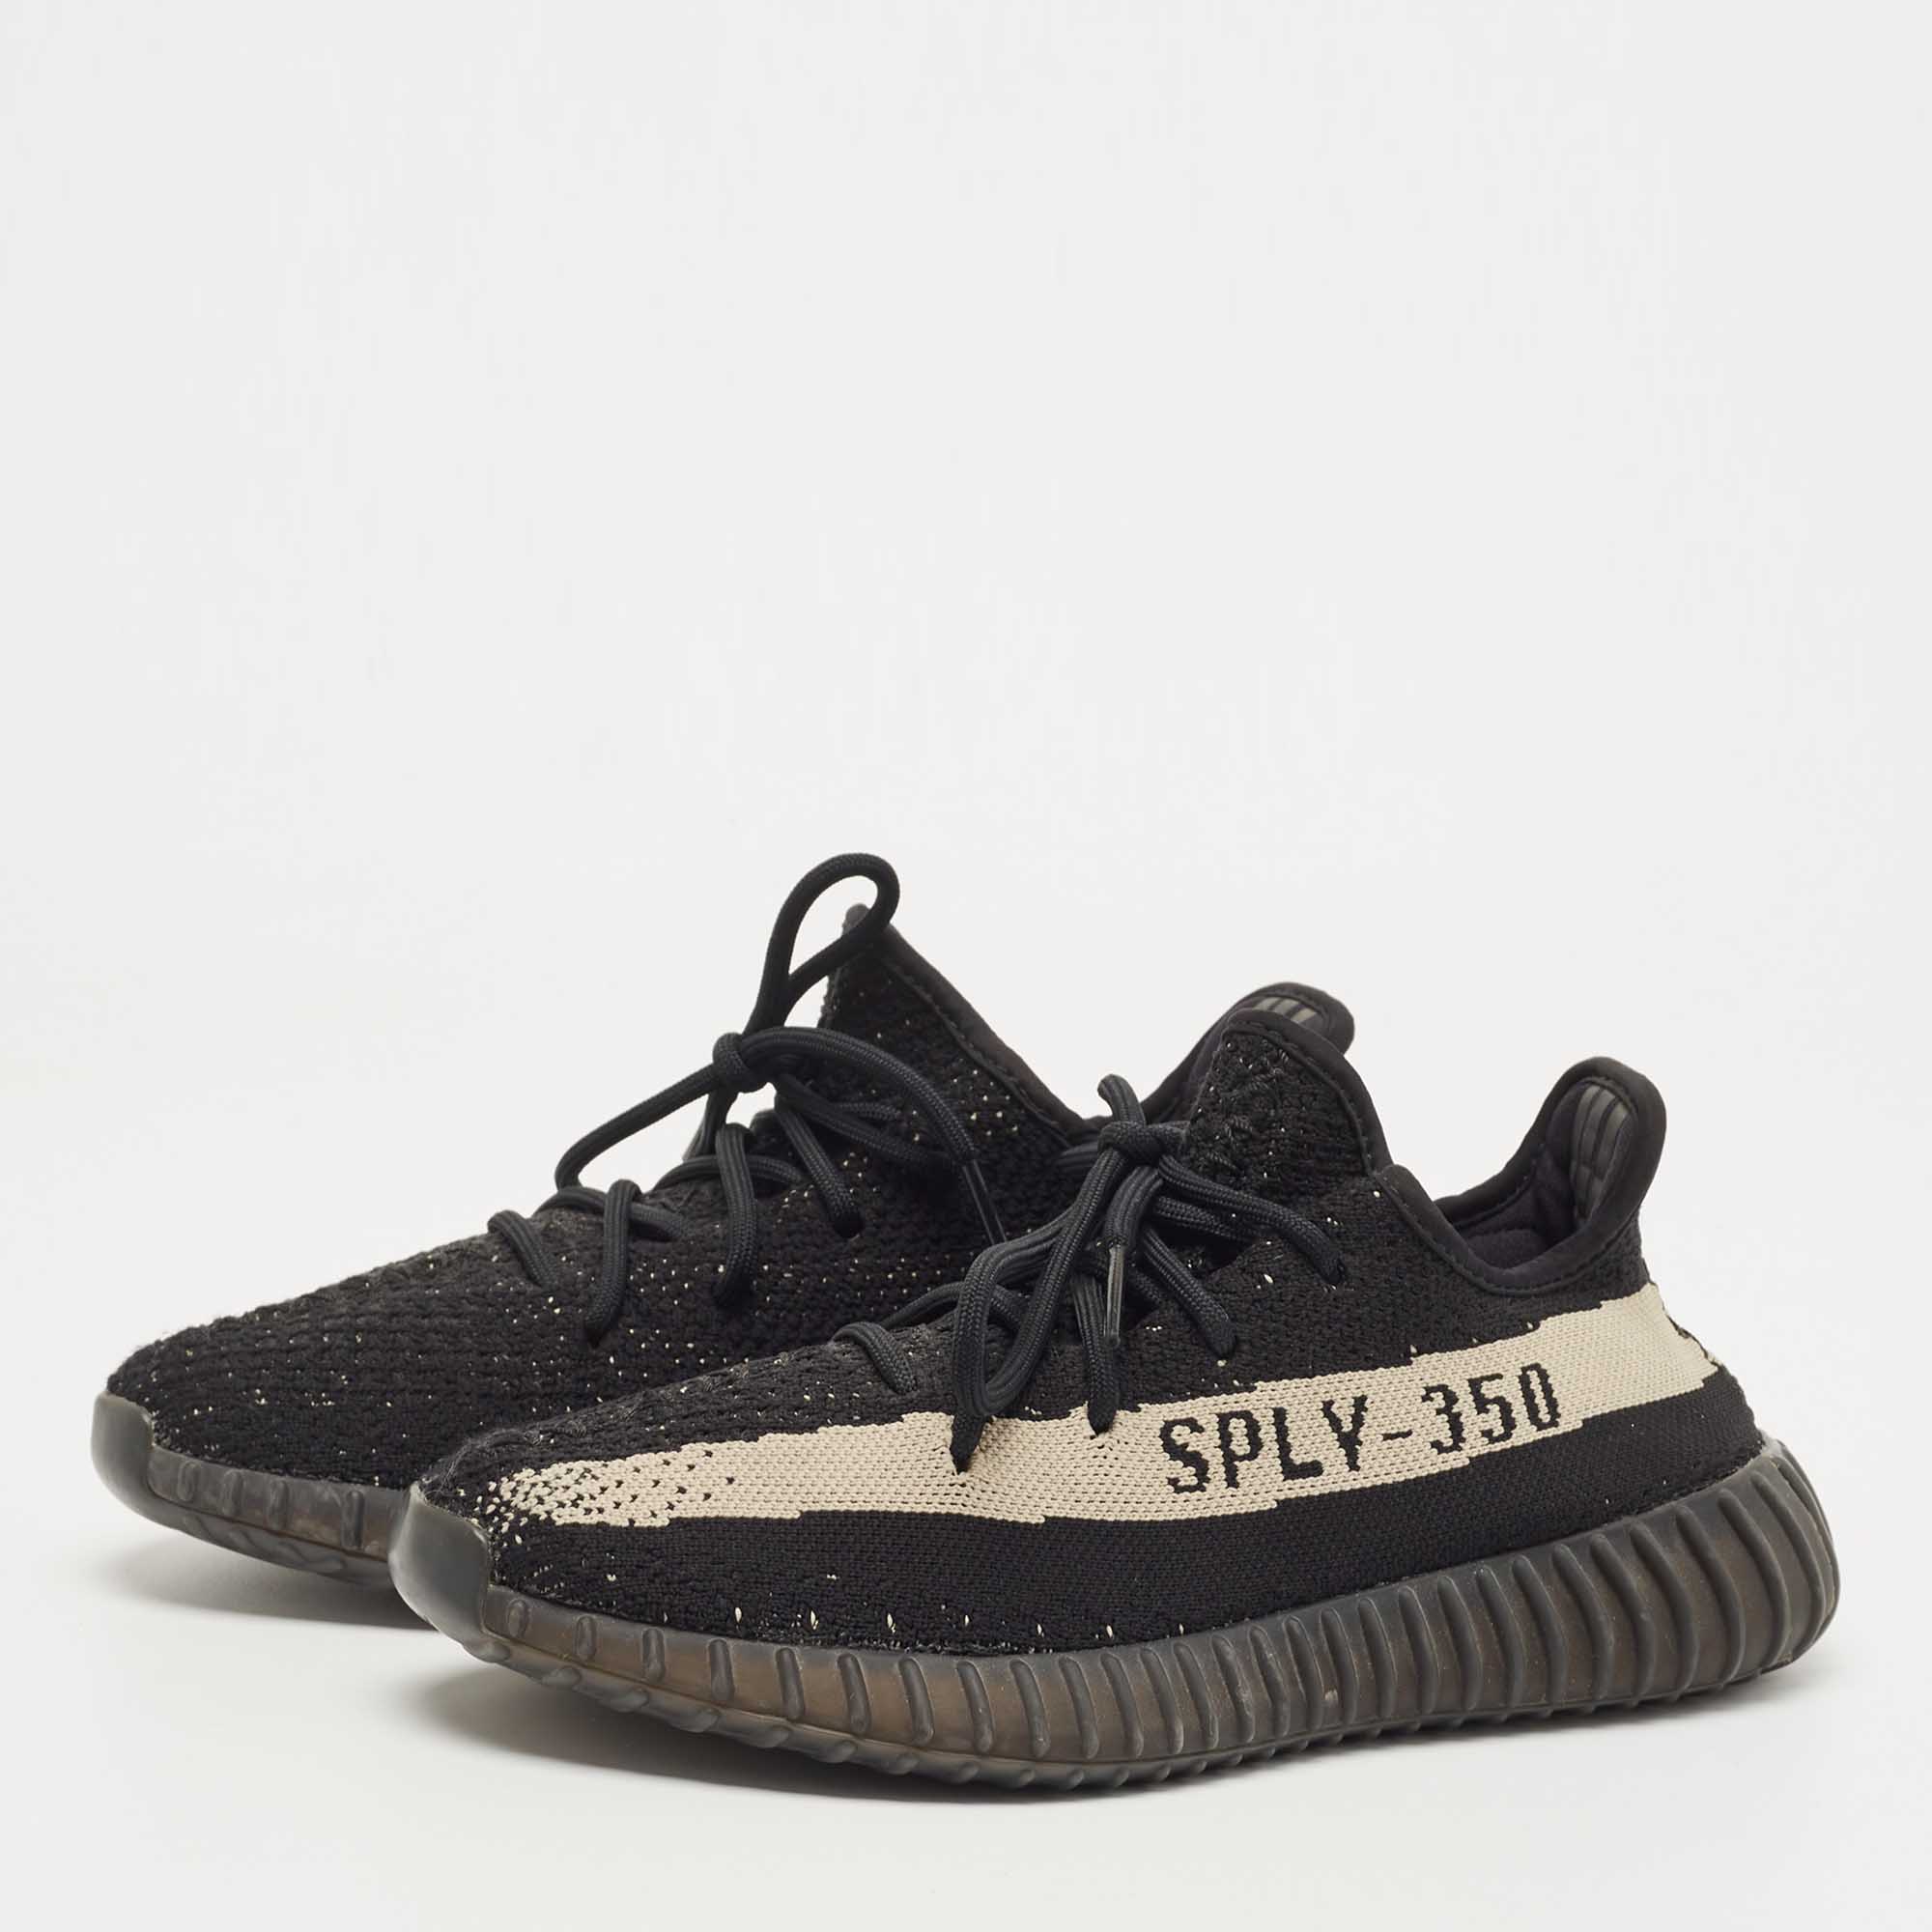 

Yeezy x Adidas Black Knit Fabric Boost 350 V2 Oreo Sneakers Size